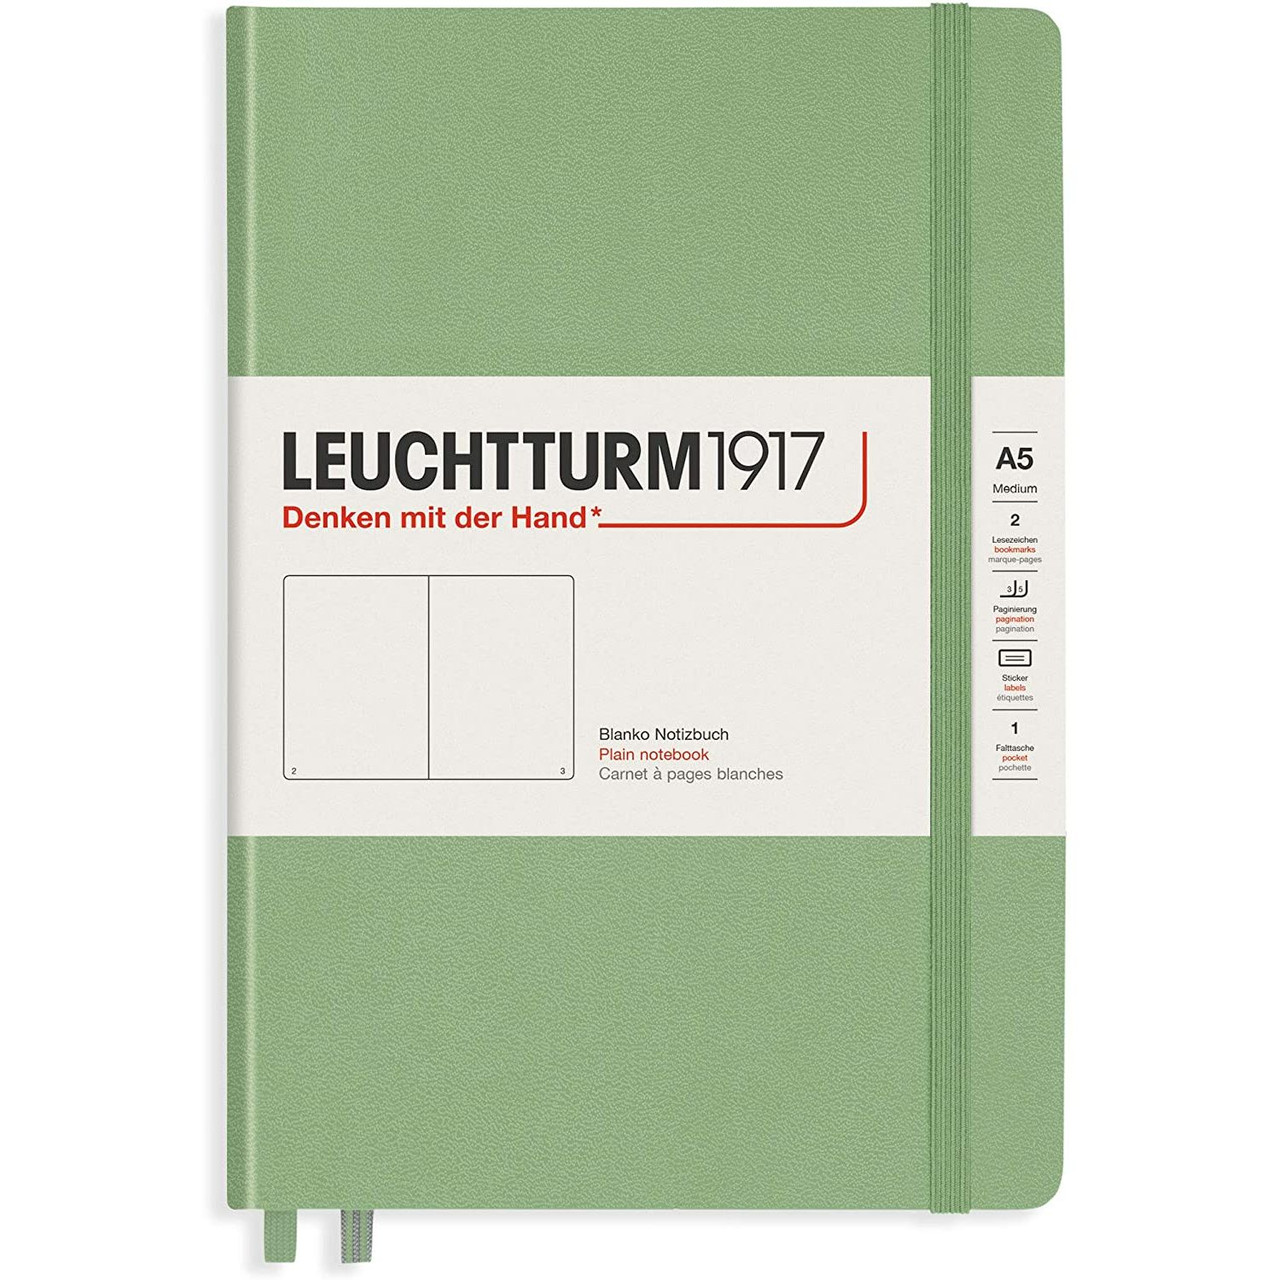 LEUCHTTURM1917 - Notebook Hardcover Medium A5-251 Numbered Pages for  Writing and Journaling (Lilac, Dotted)